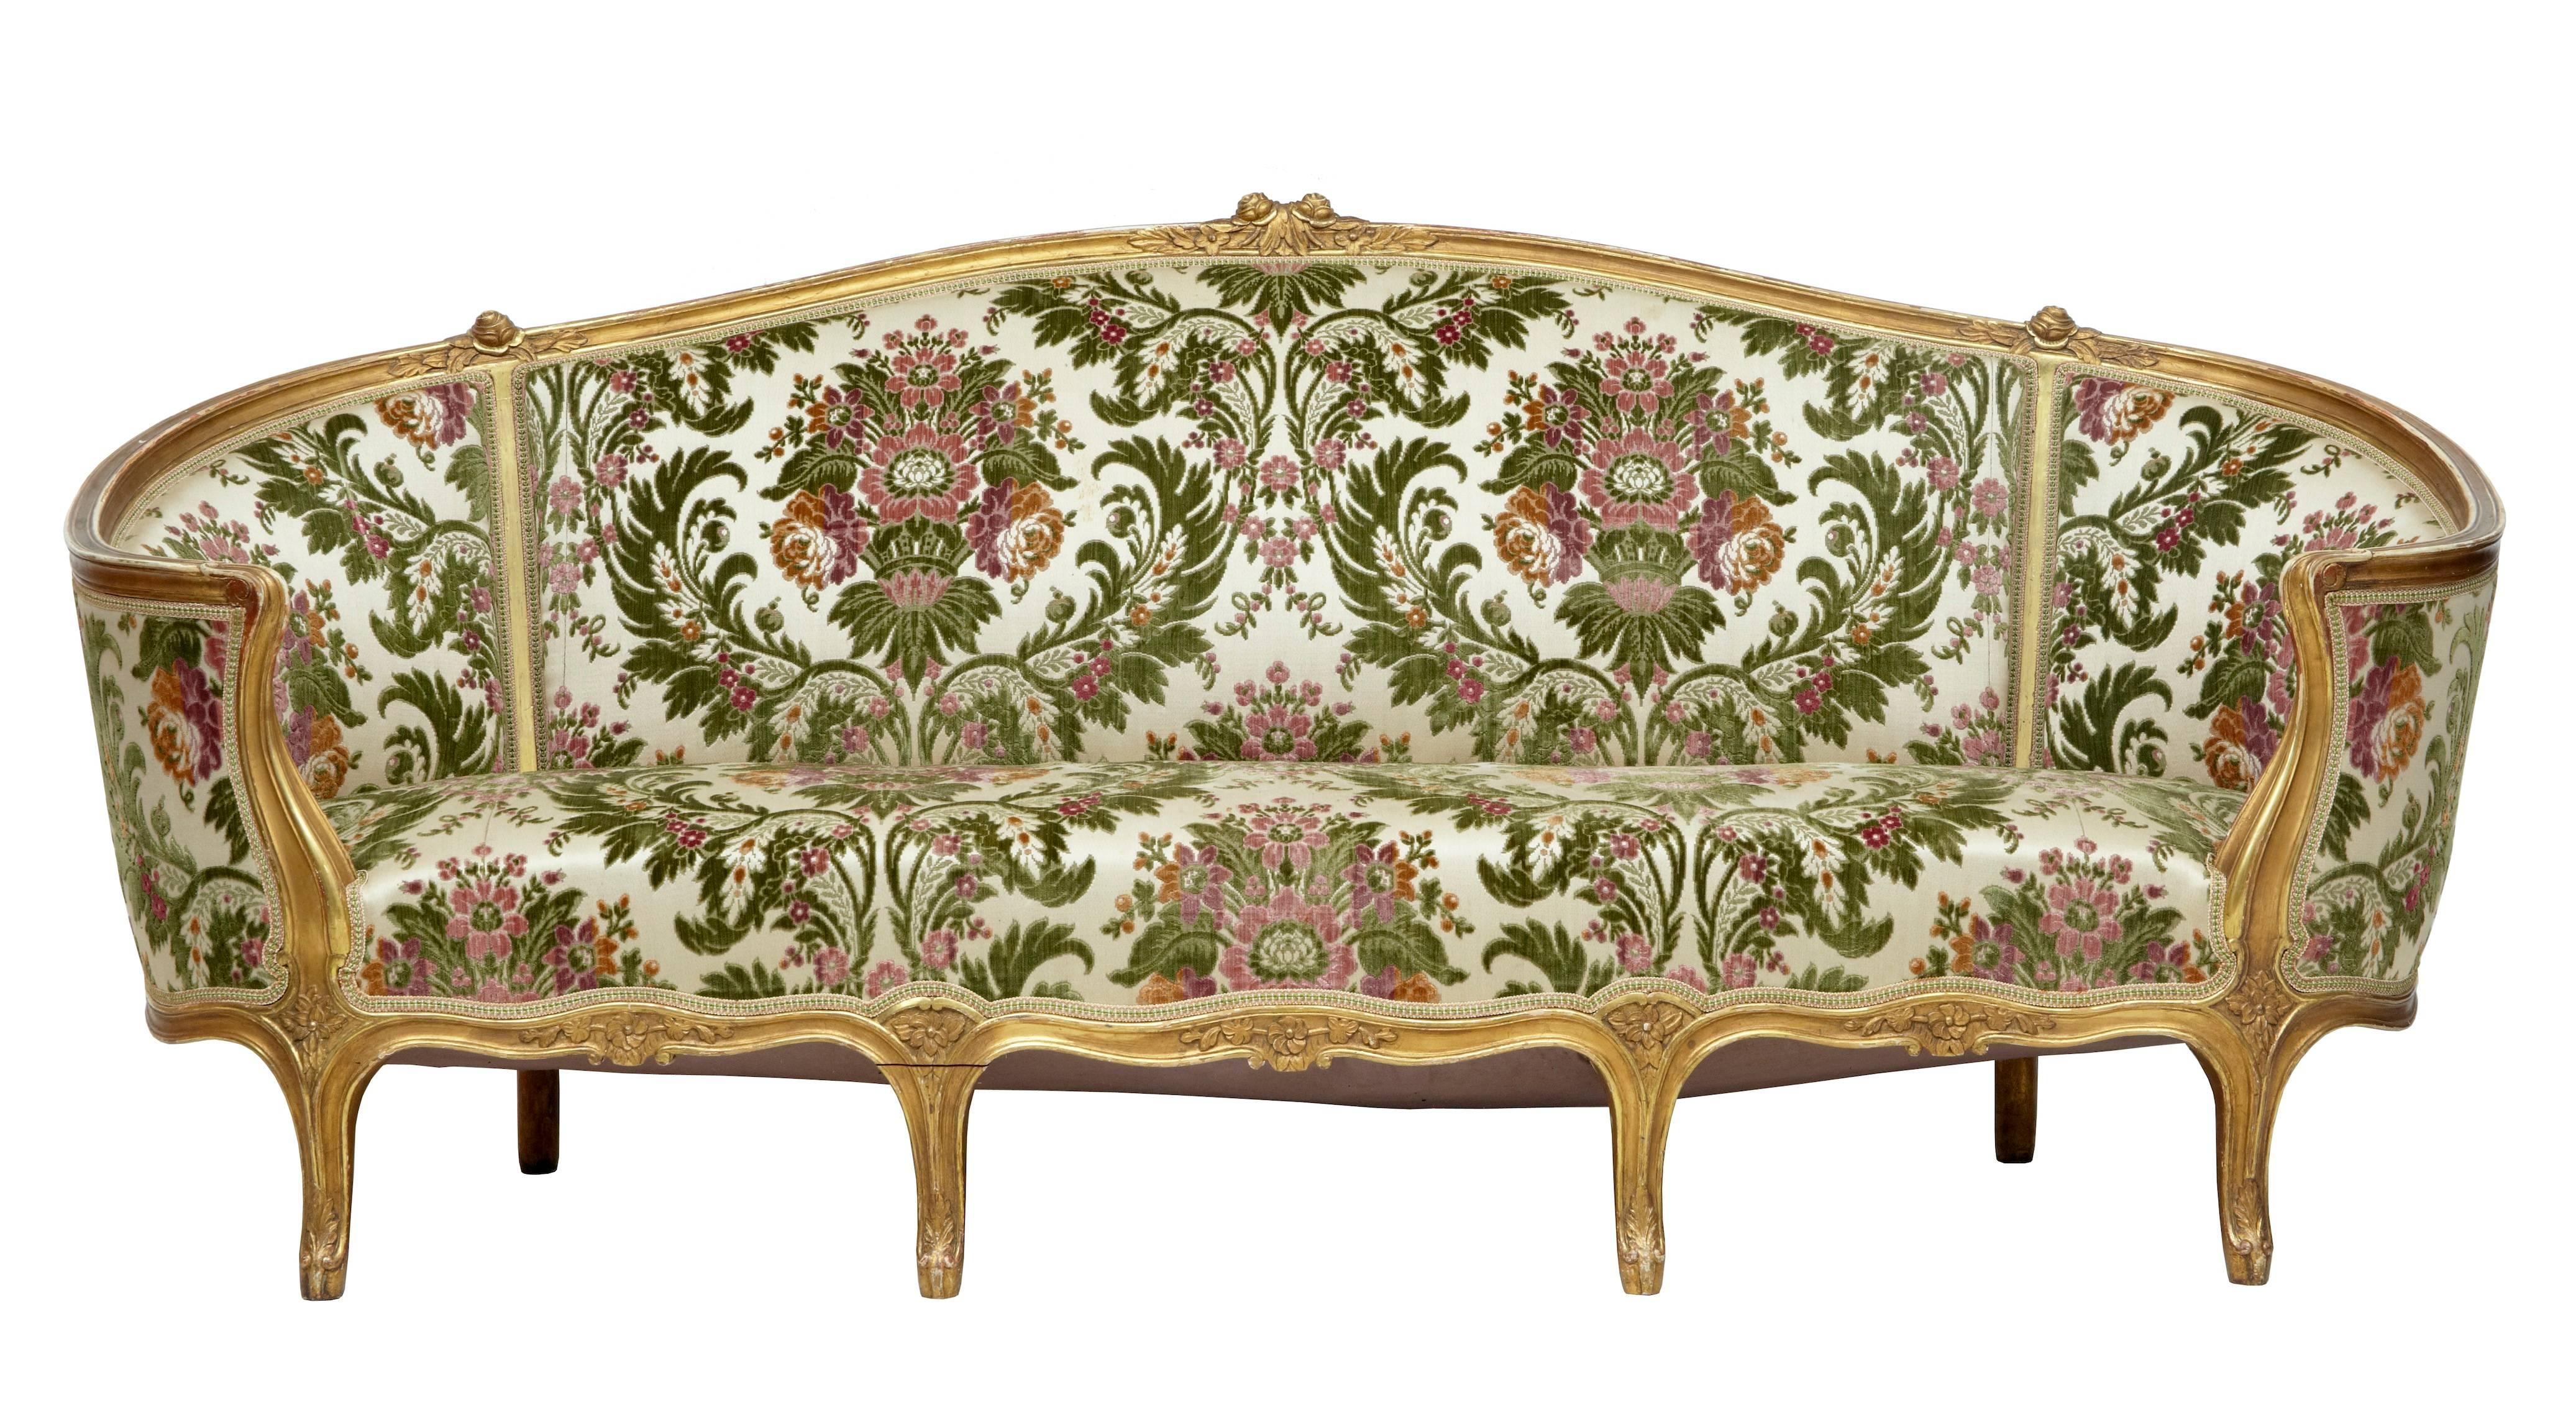 French five piece suite comprising of one sofa, two armchairs and two single chairs, circa 1880.
Beautiful sofa with flowing arms, complemented by matching chairs.
Finely carved detail to back rests and frieze.
Floral upholstery in good order.